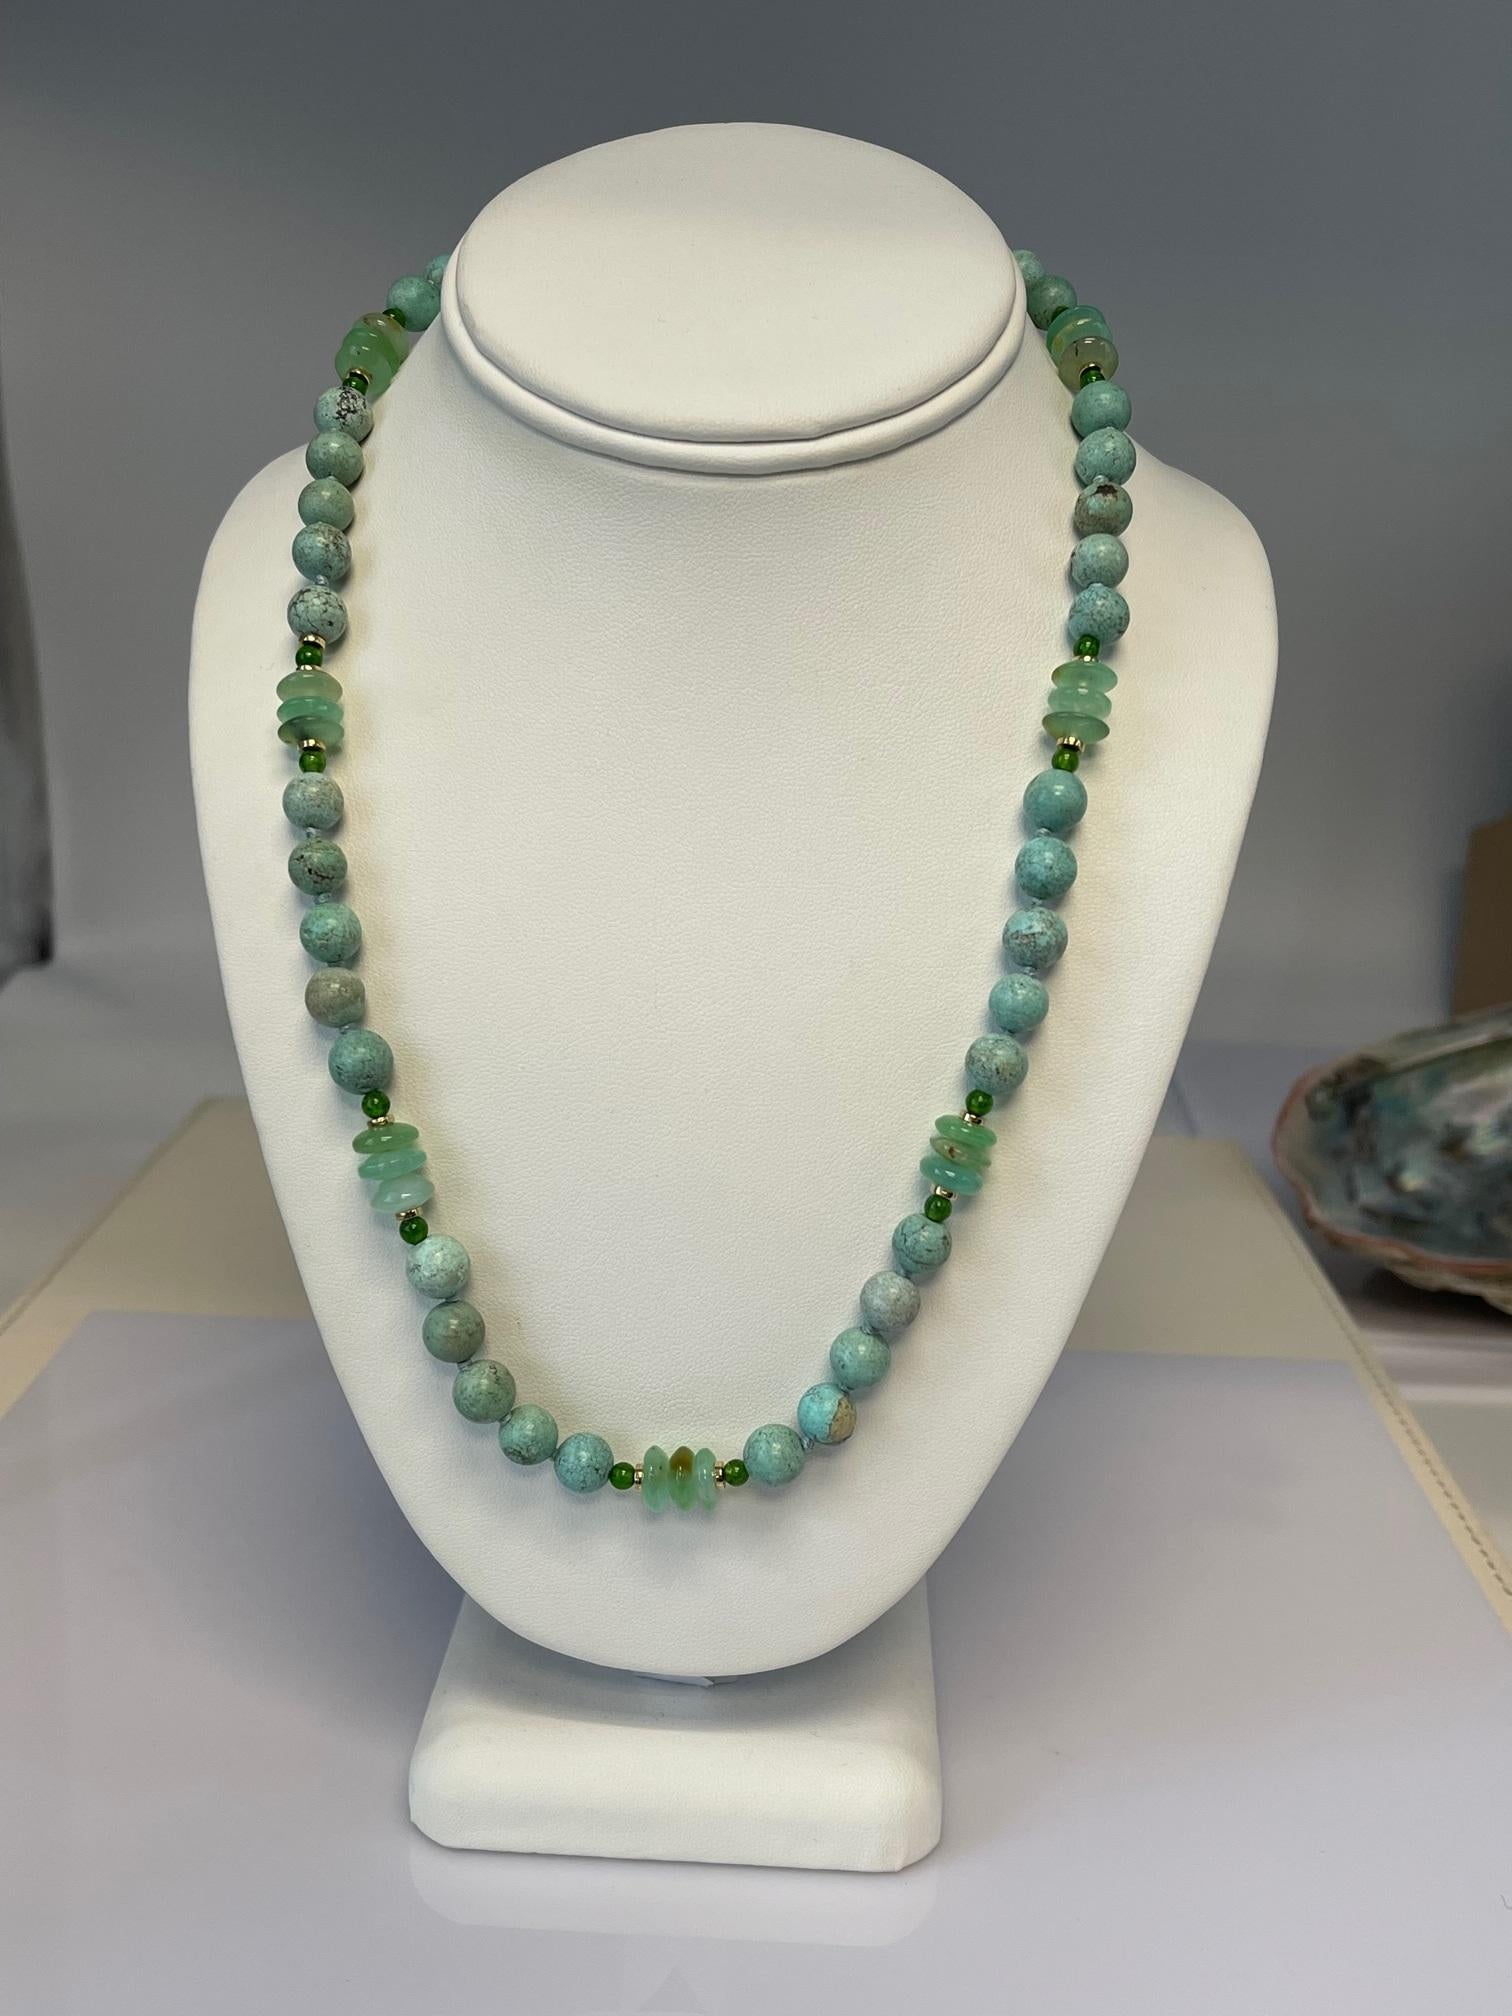 Turquoise, Chrome Diopside and Chrysoprase Necklace, 21 Inches For Sale 1